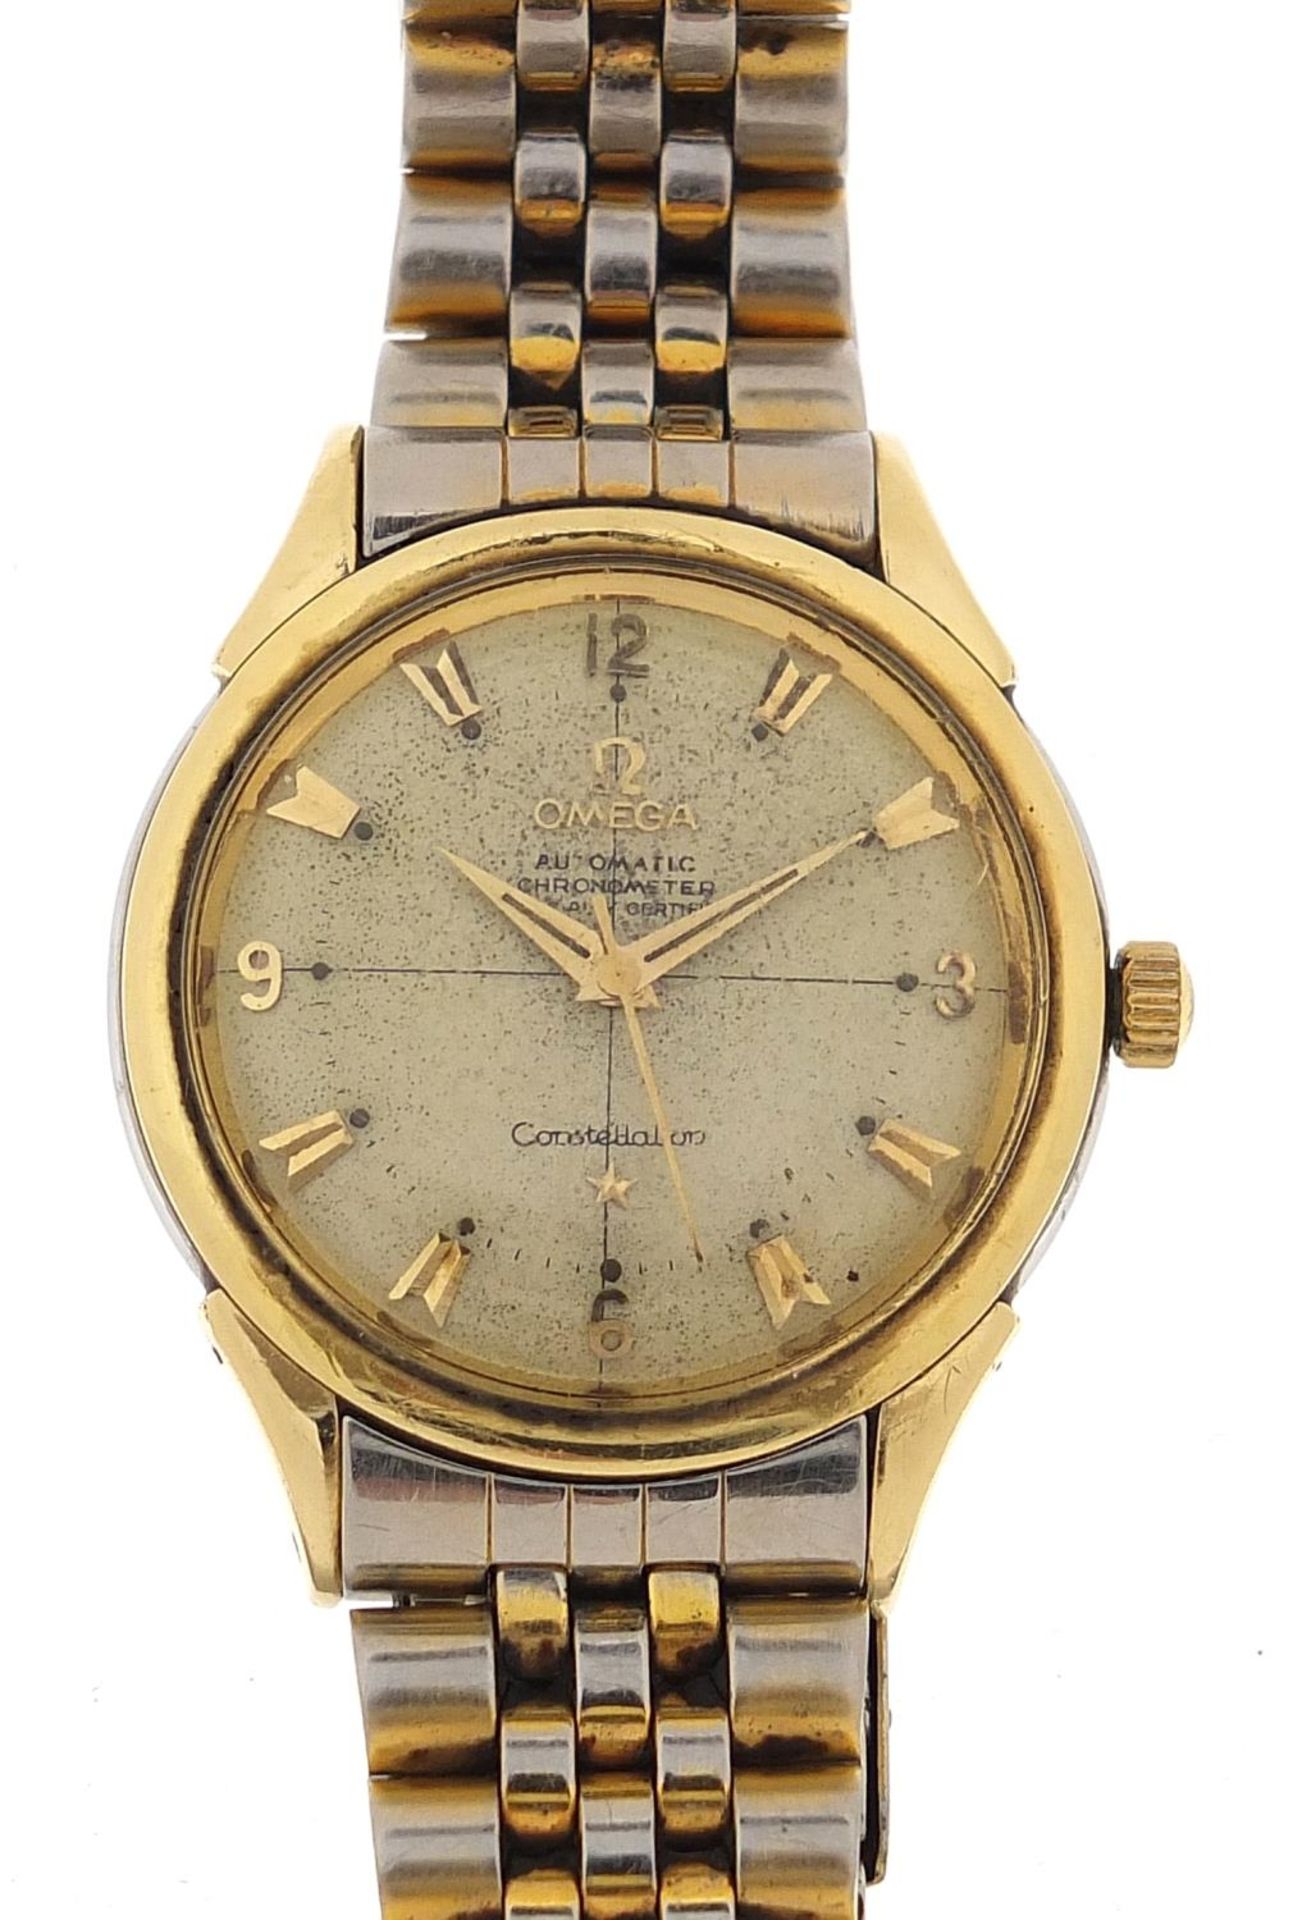 Omega, gentlemen's Omega Constellation automatic wristwatch with bumper movement and cross hair